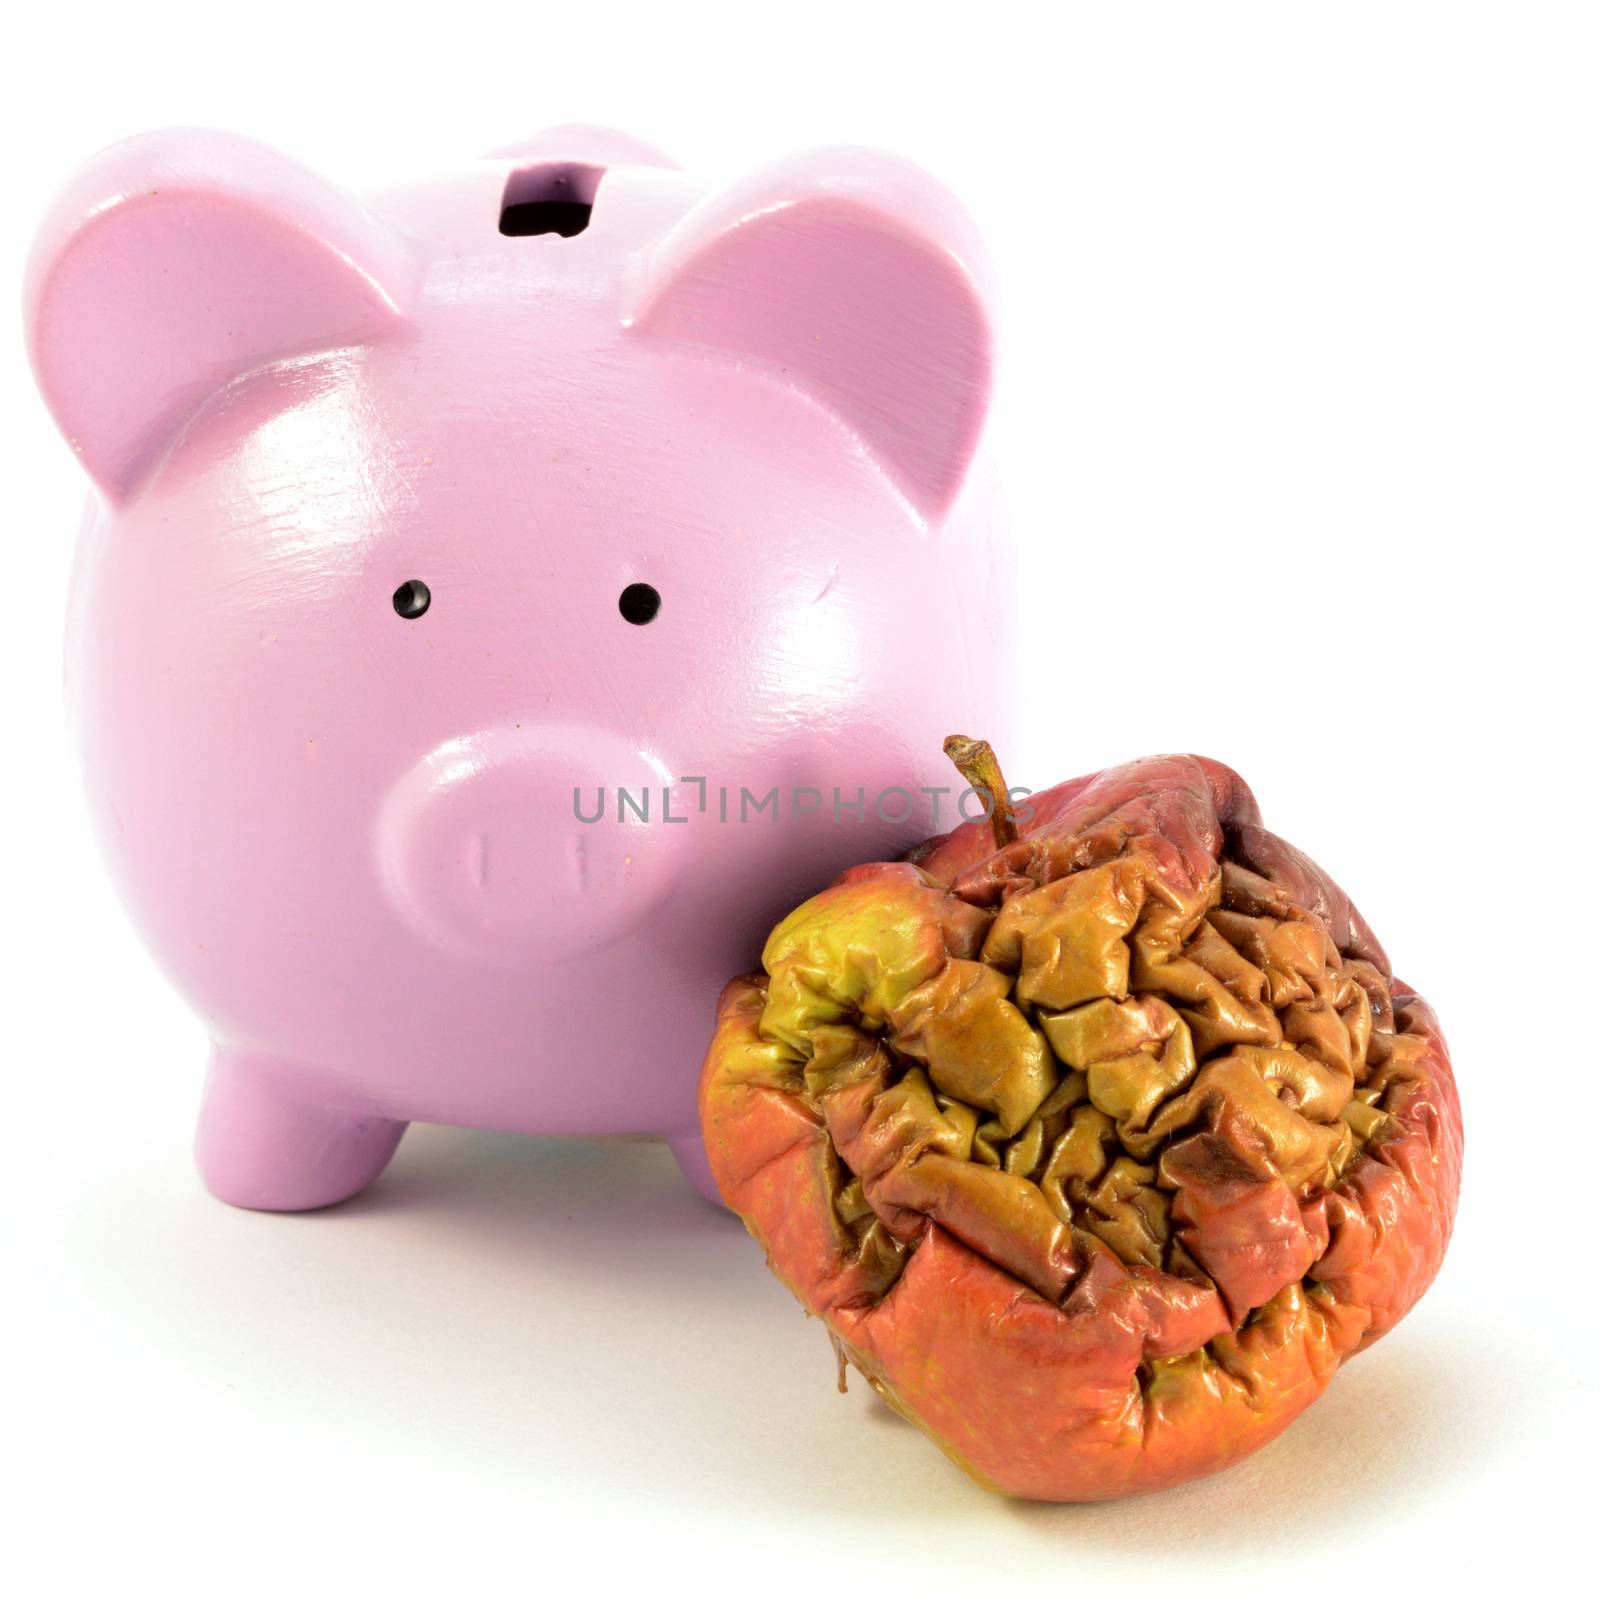 A conceptual image focusing on a pig bank and rotten apple for several monetary ideas.